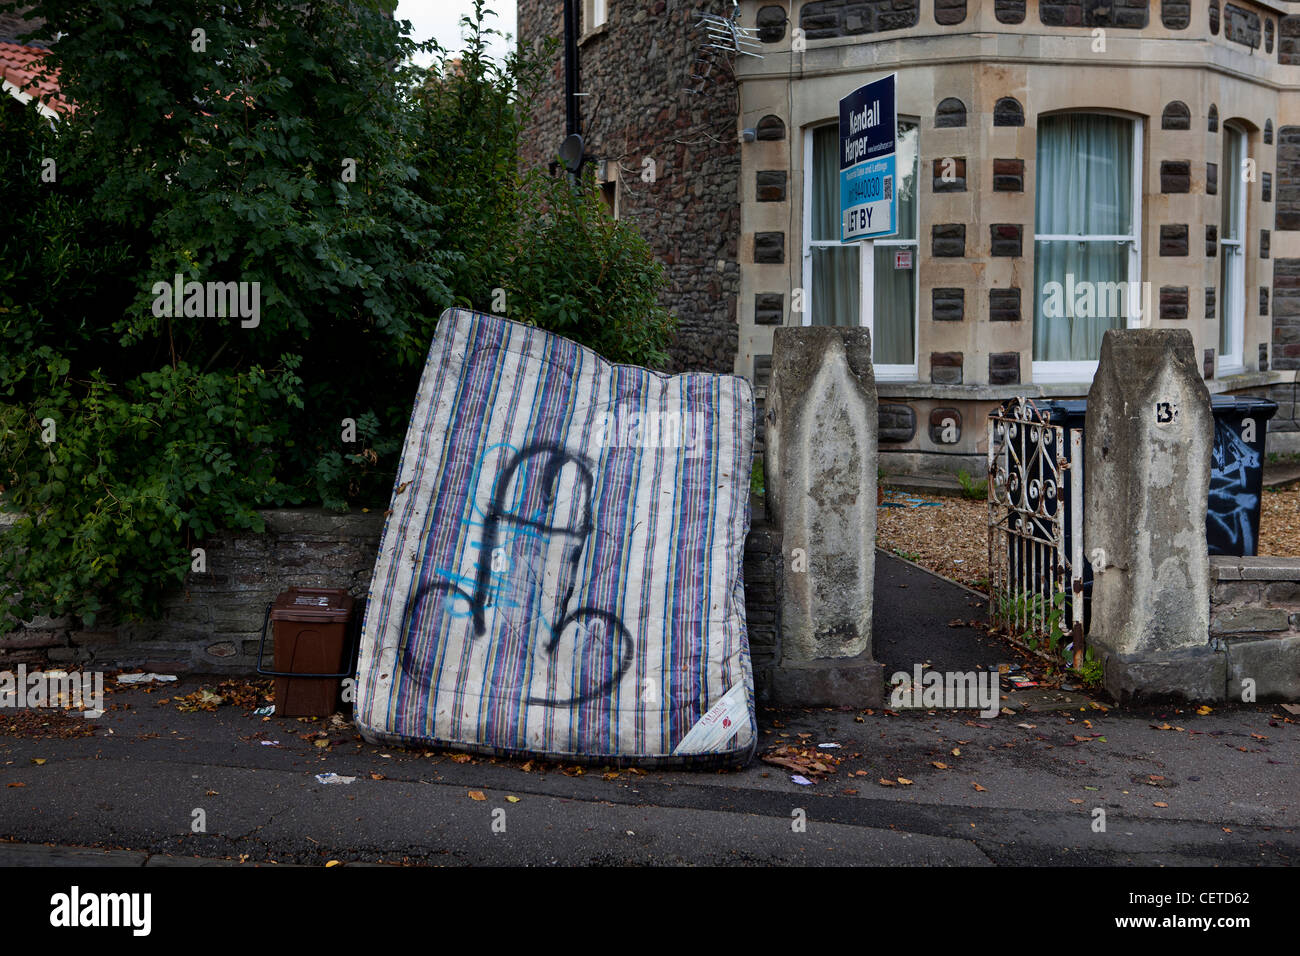 Discarded mattress outside a house in Bristol, UK Stock Photo